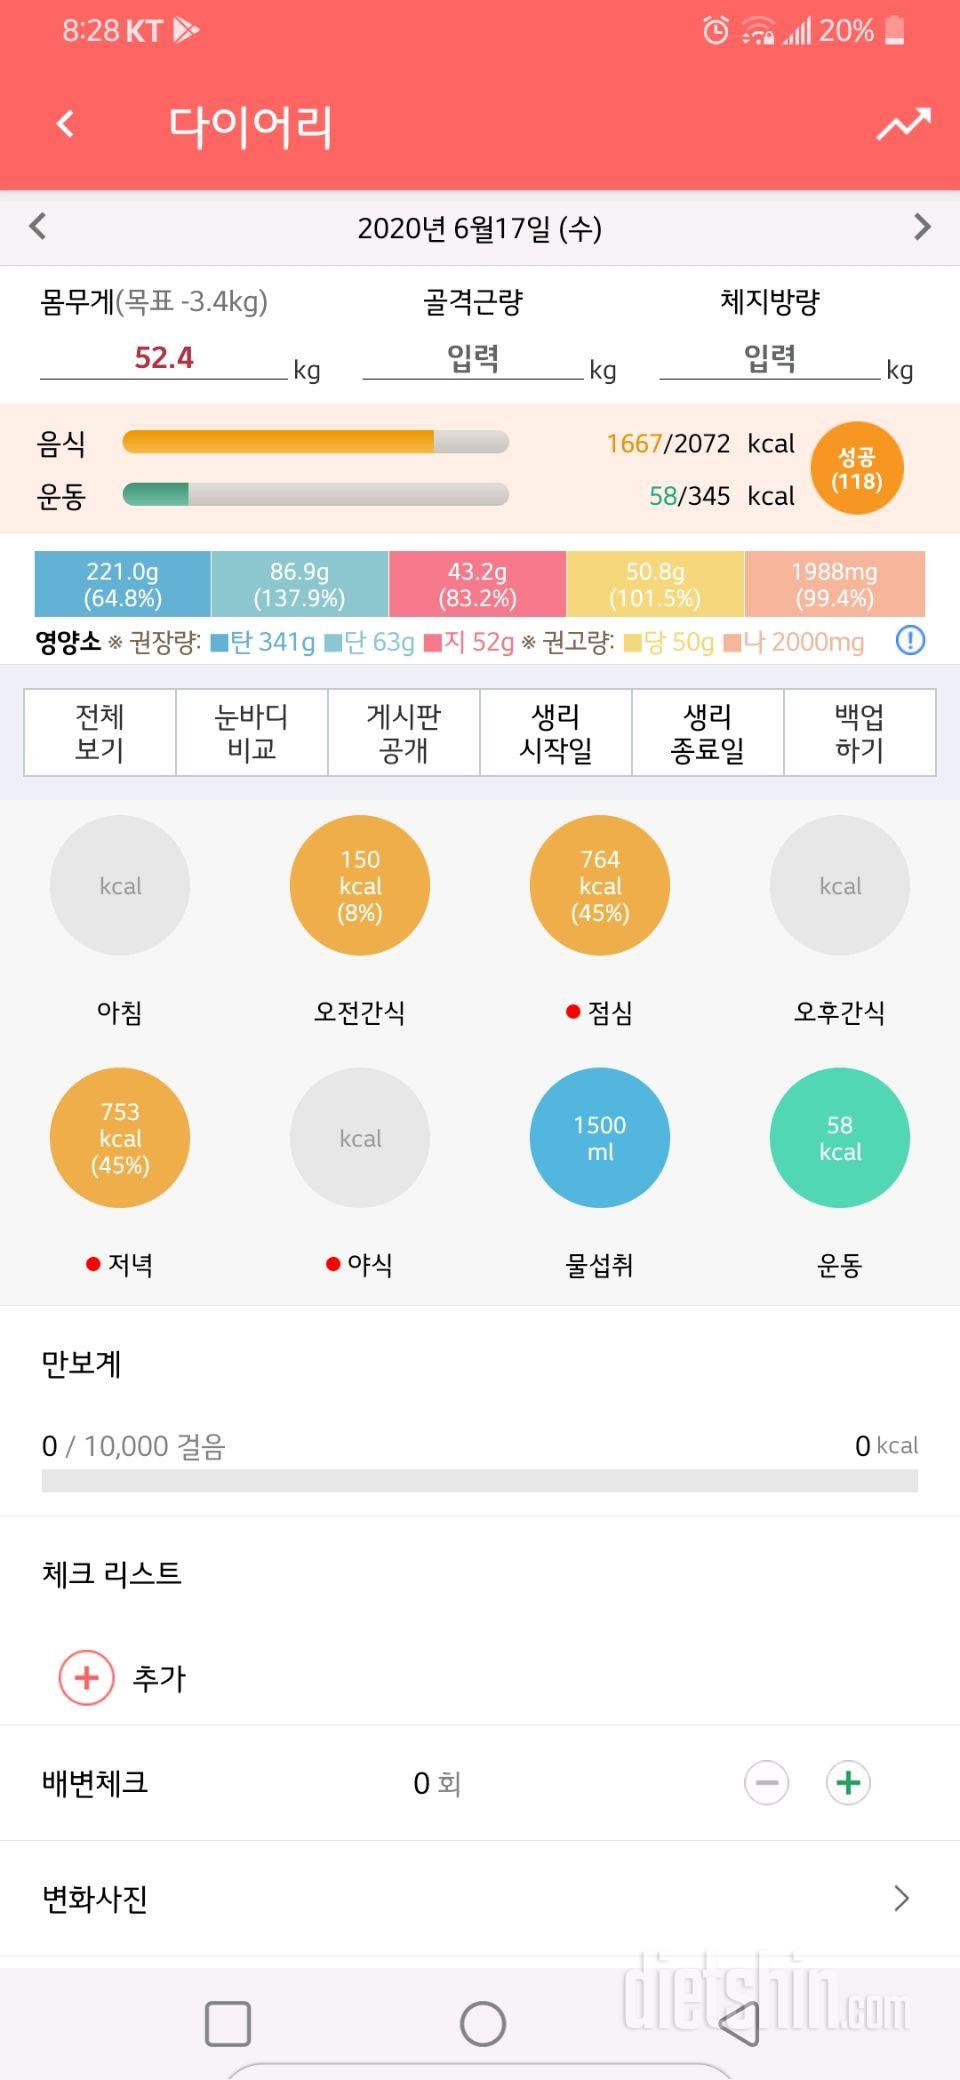 🍬6월 17일 수욜